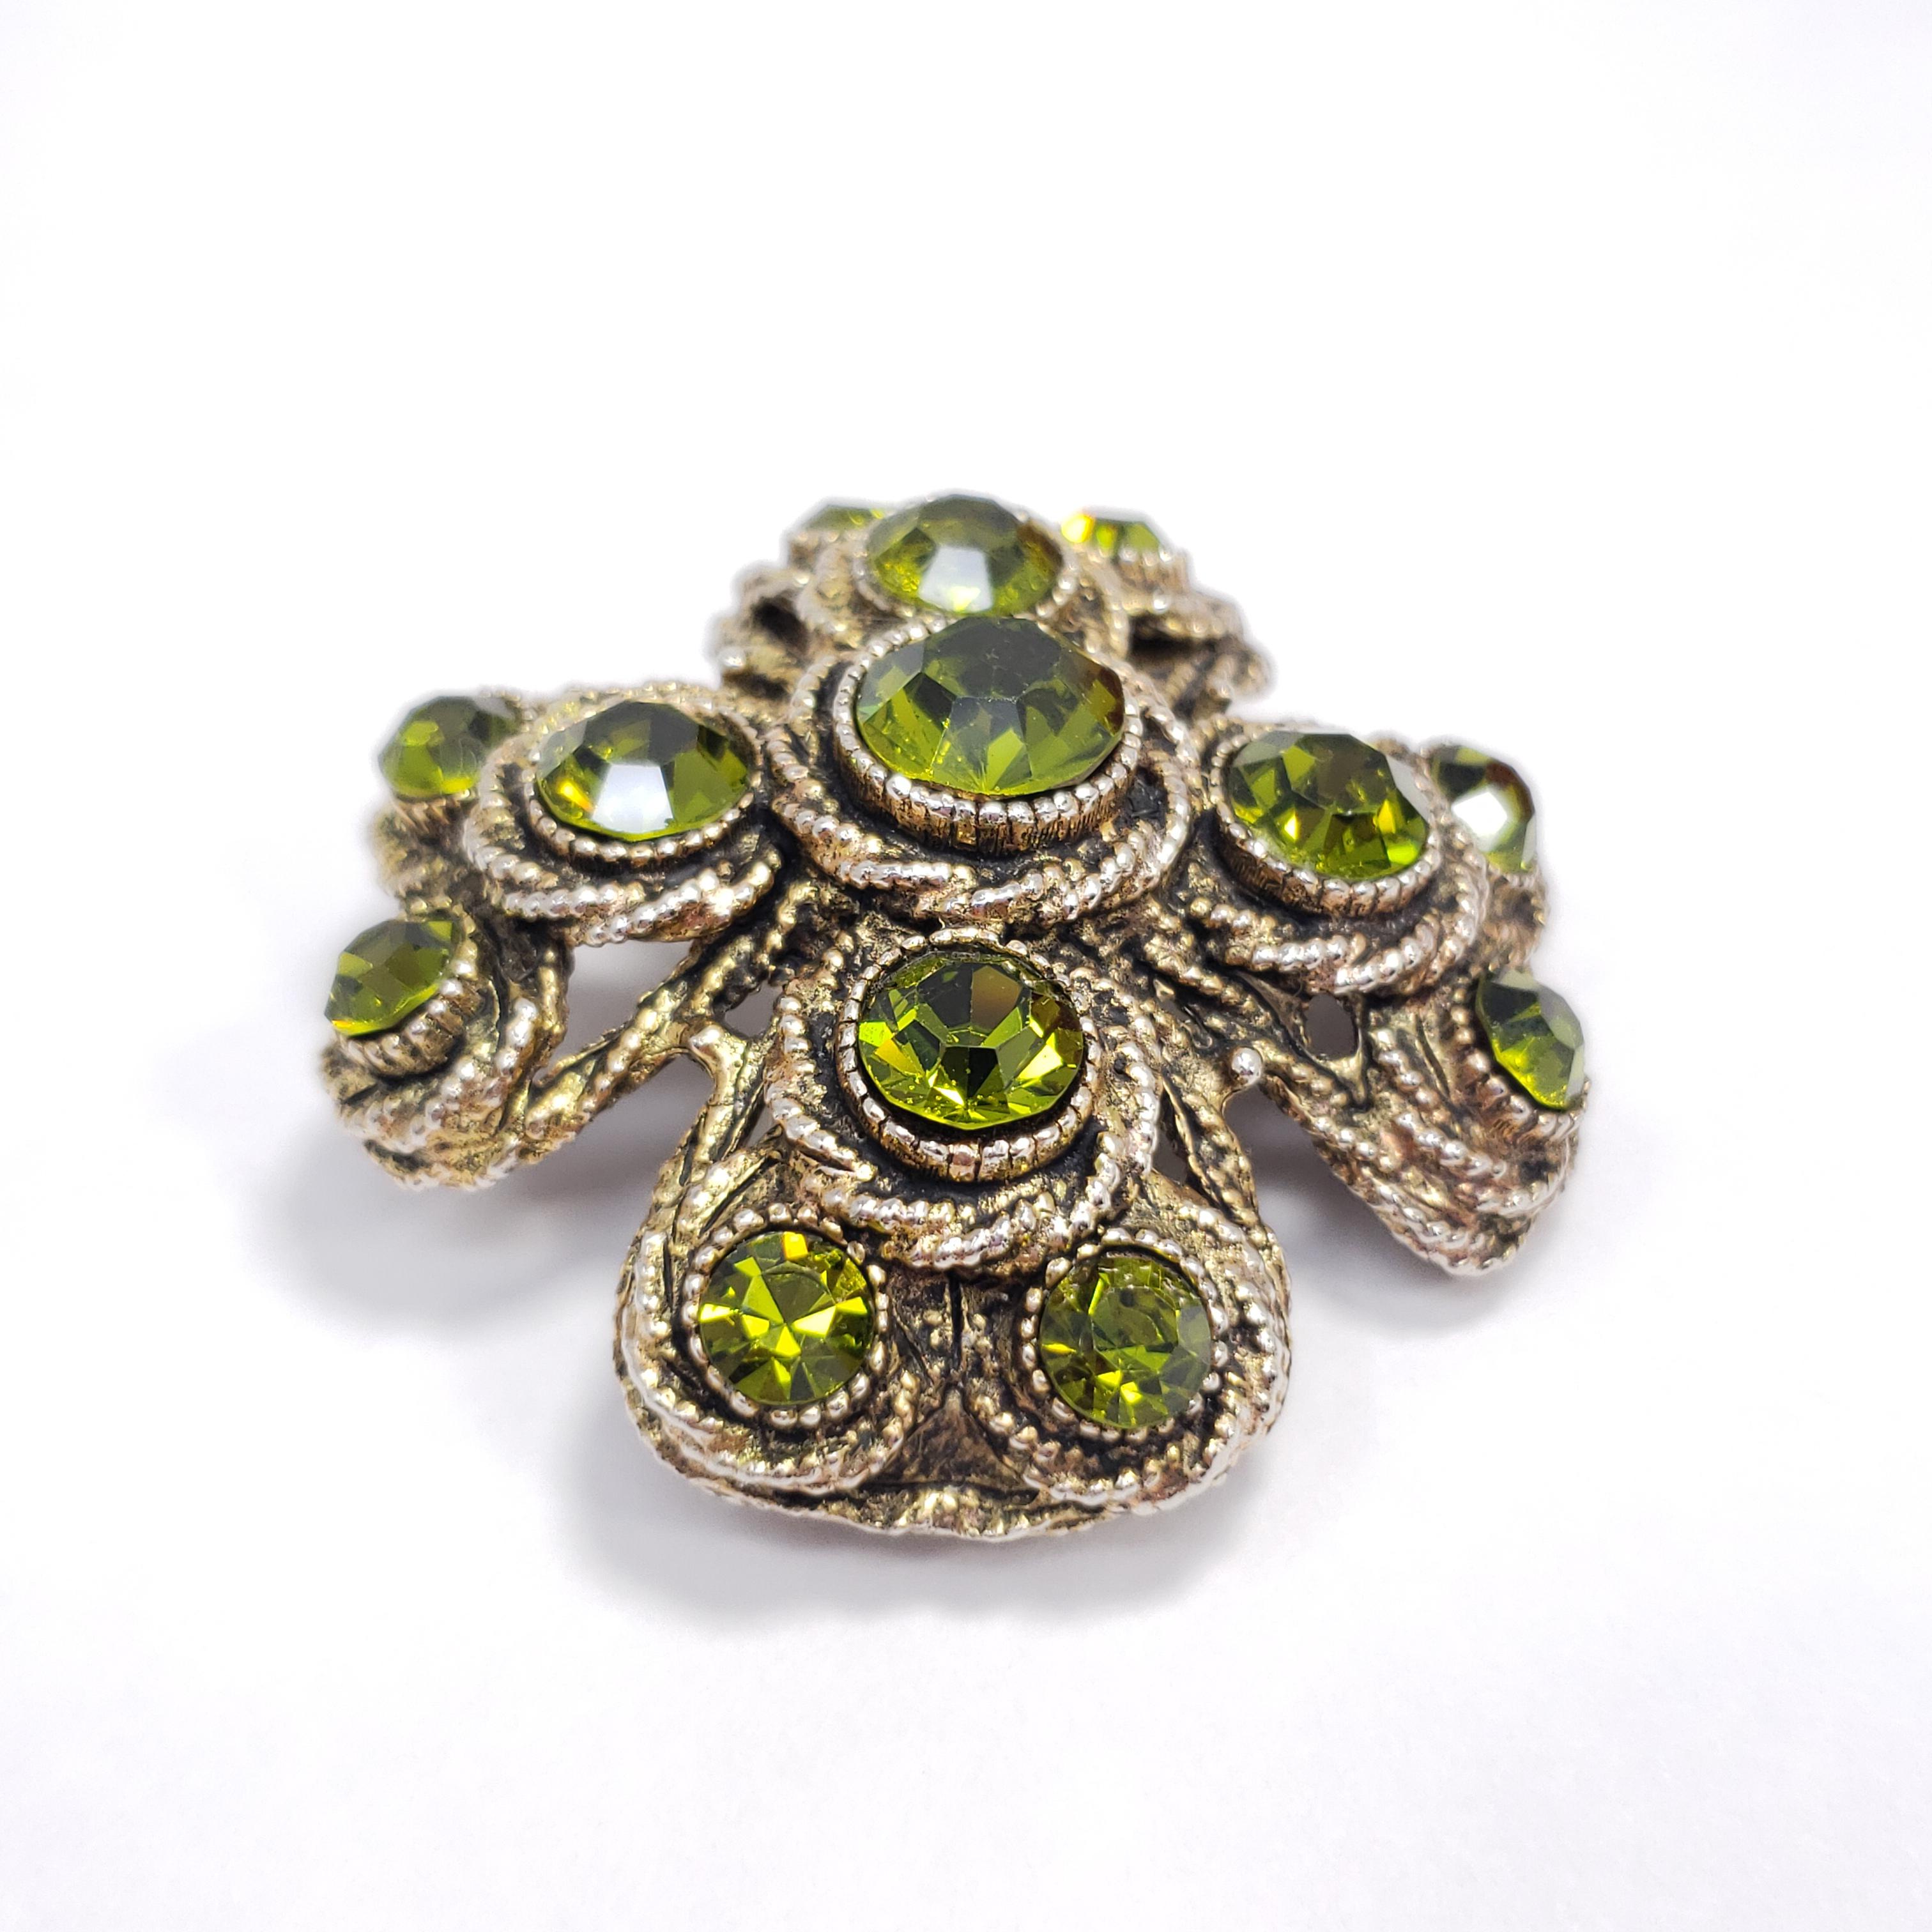 An exquisite brooch from the mysterious Hargo Creations company, active in New York during the 1950s. Features an accented Maltese cross design, decorated with round-cut peridot crystals. Perfect to wear or as a rare vintage collection piece.

Marks